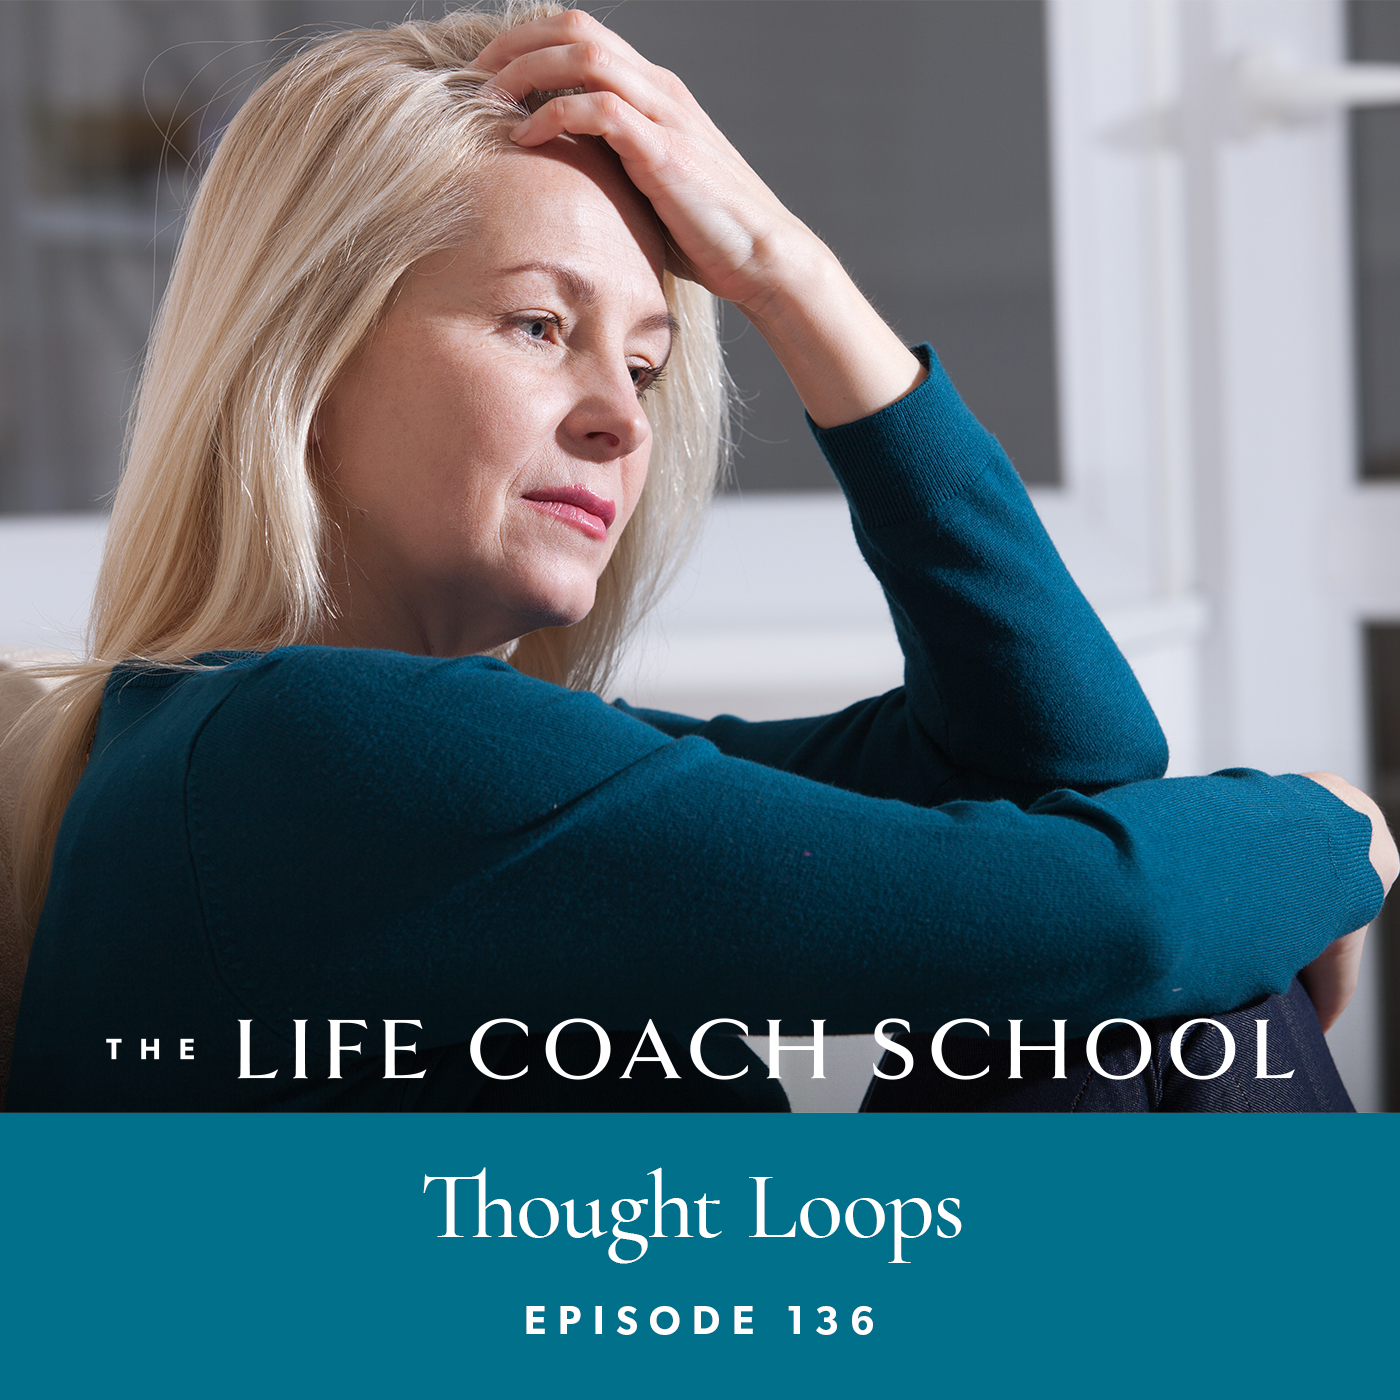 The Life Coach School Podcast with Brooke Castillo | Episode 136 | Thought Loops